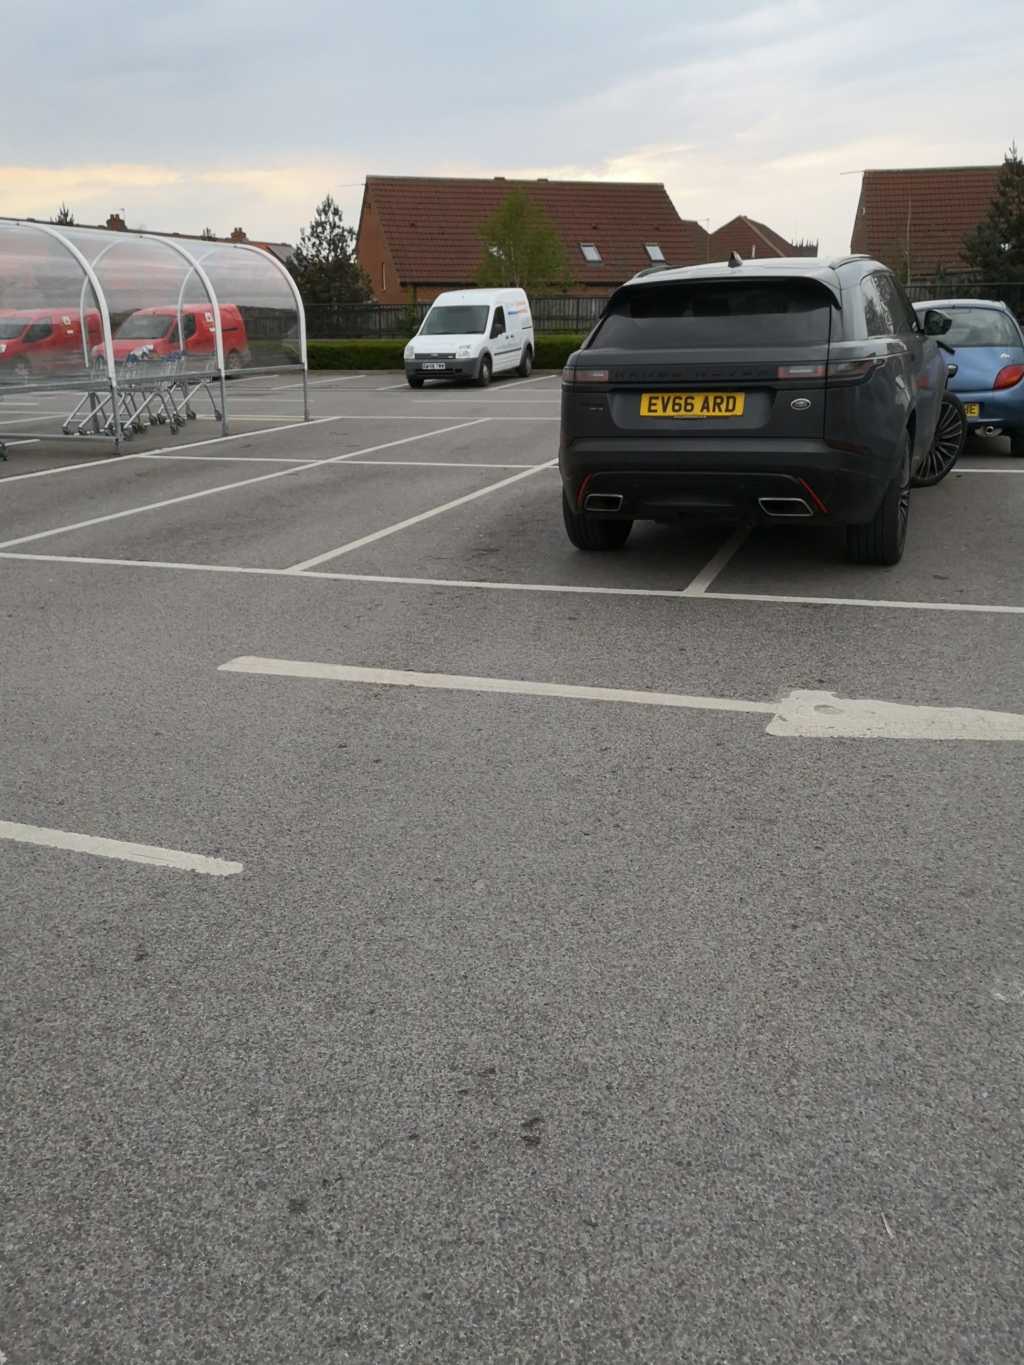 EV66 ARD  is an Inconsiderate Parker